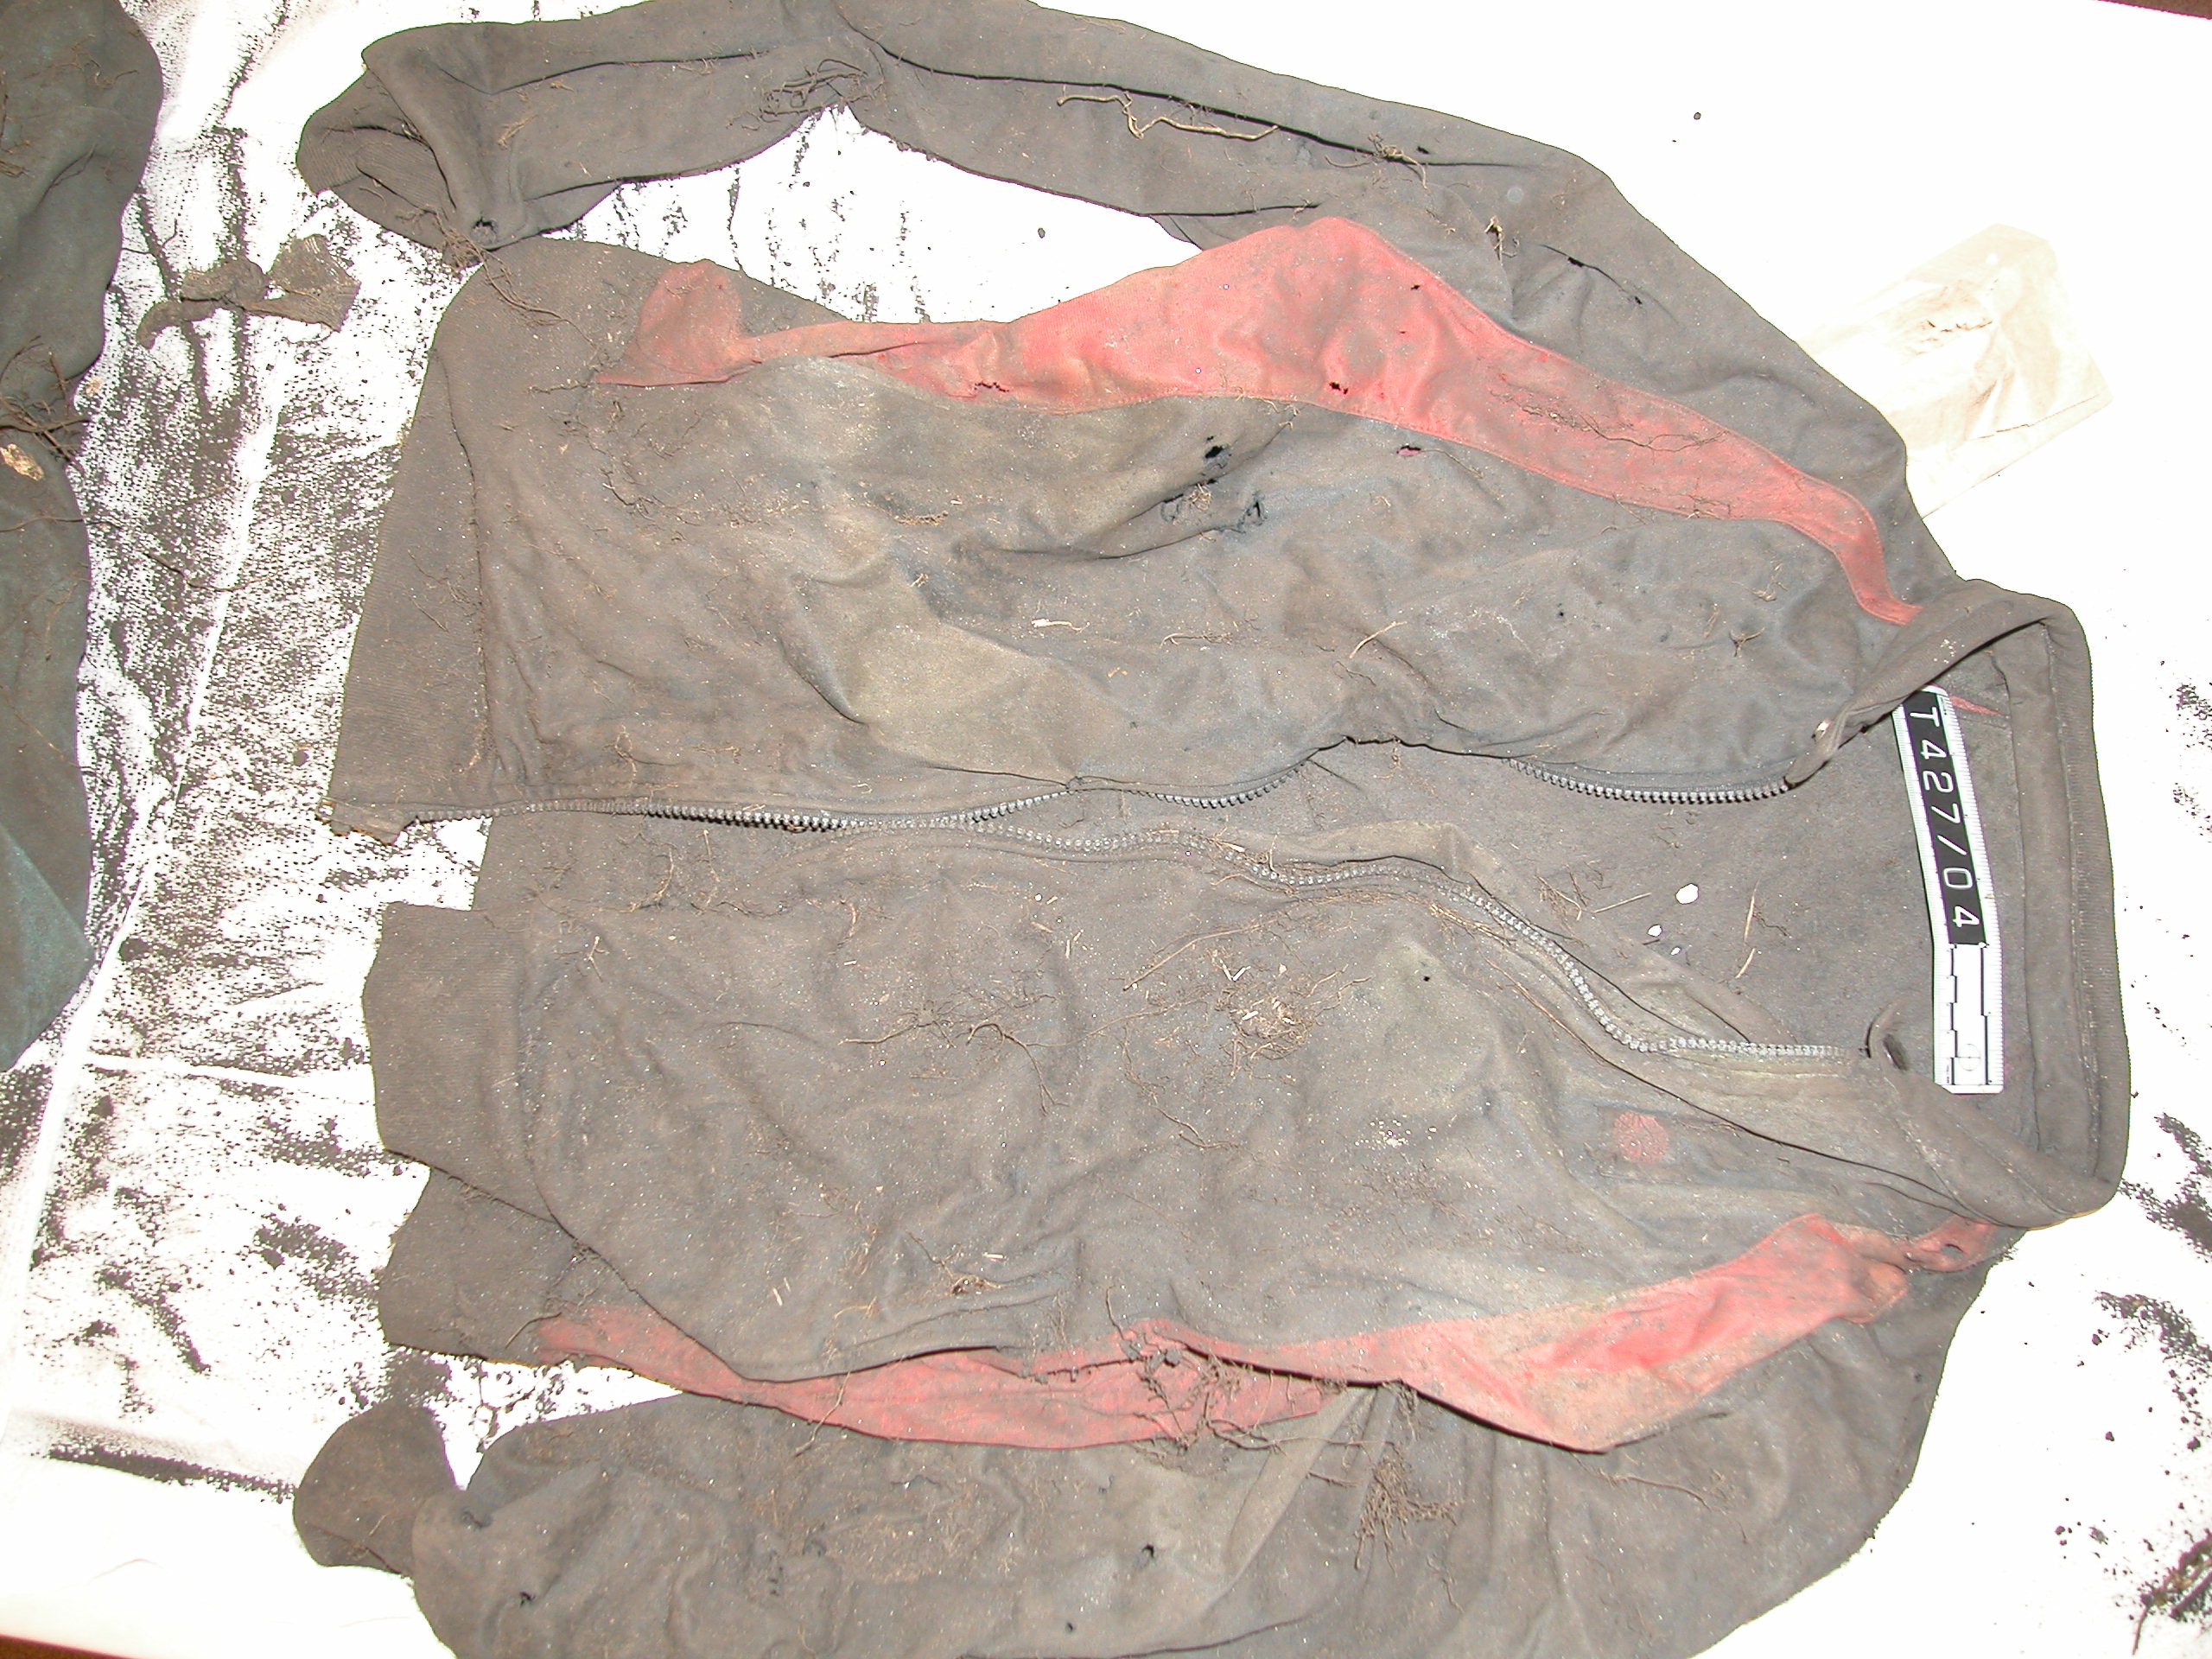 BLACK JACKET WITH RED STRIPES FOUND WITH BODY